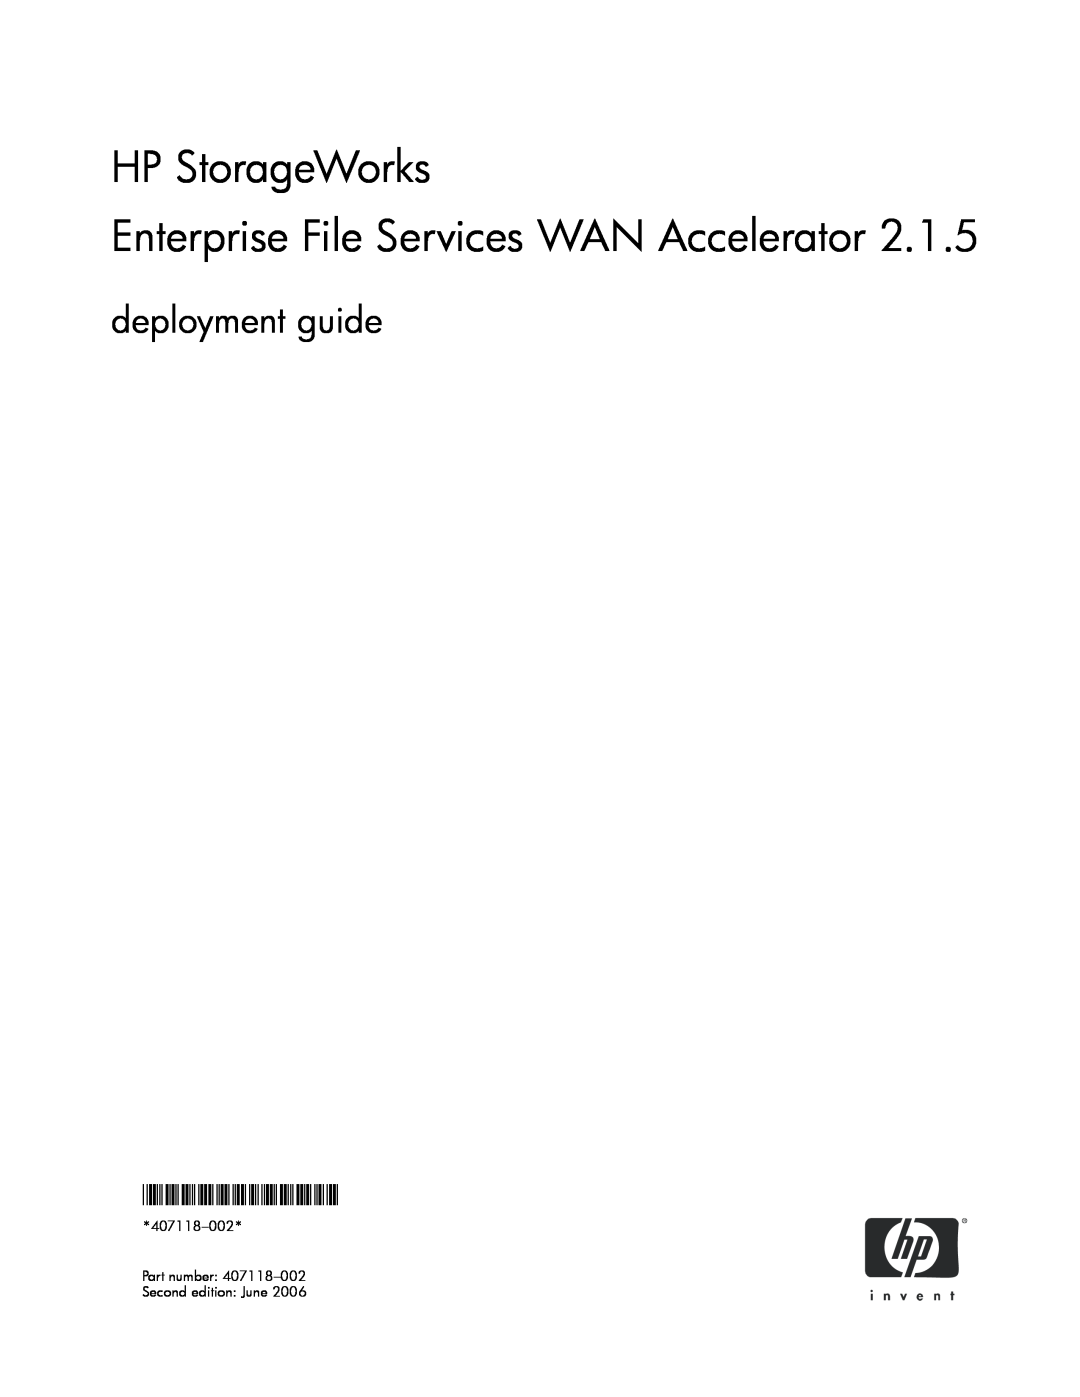 HP manual HP StorageWorks Enterprise File Services WAN Accelerator Bypass NIC, 407063-003, installation guide 